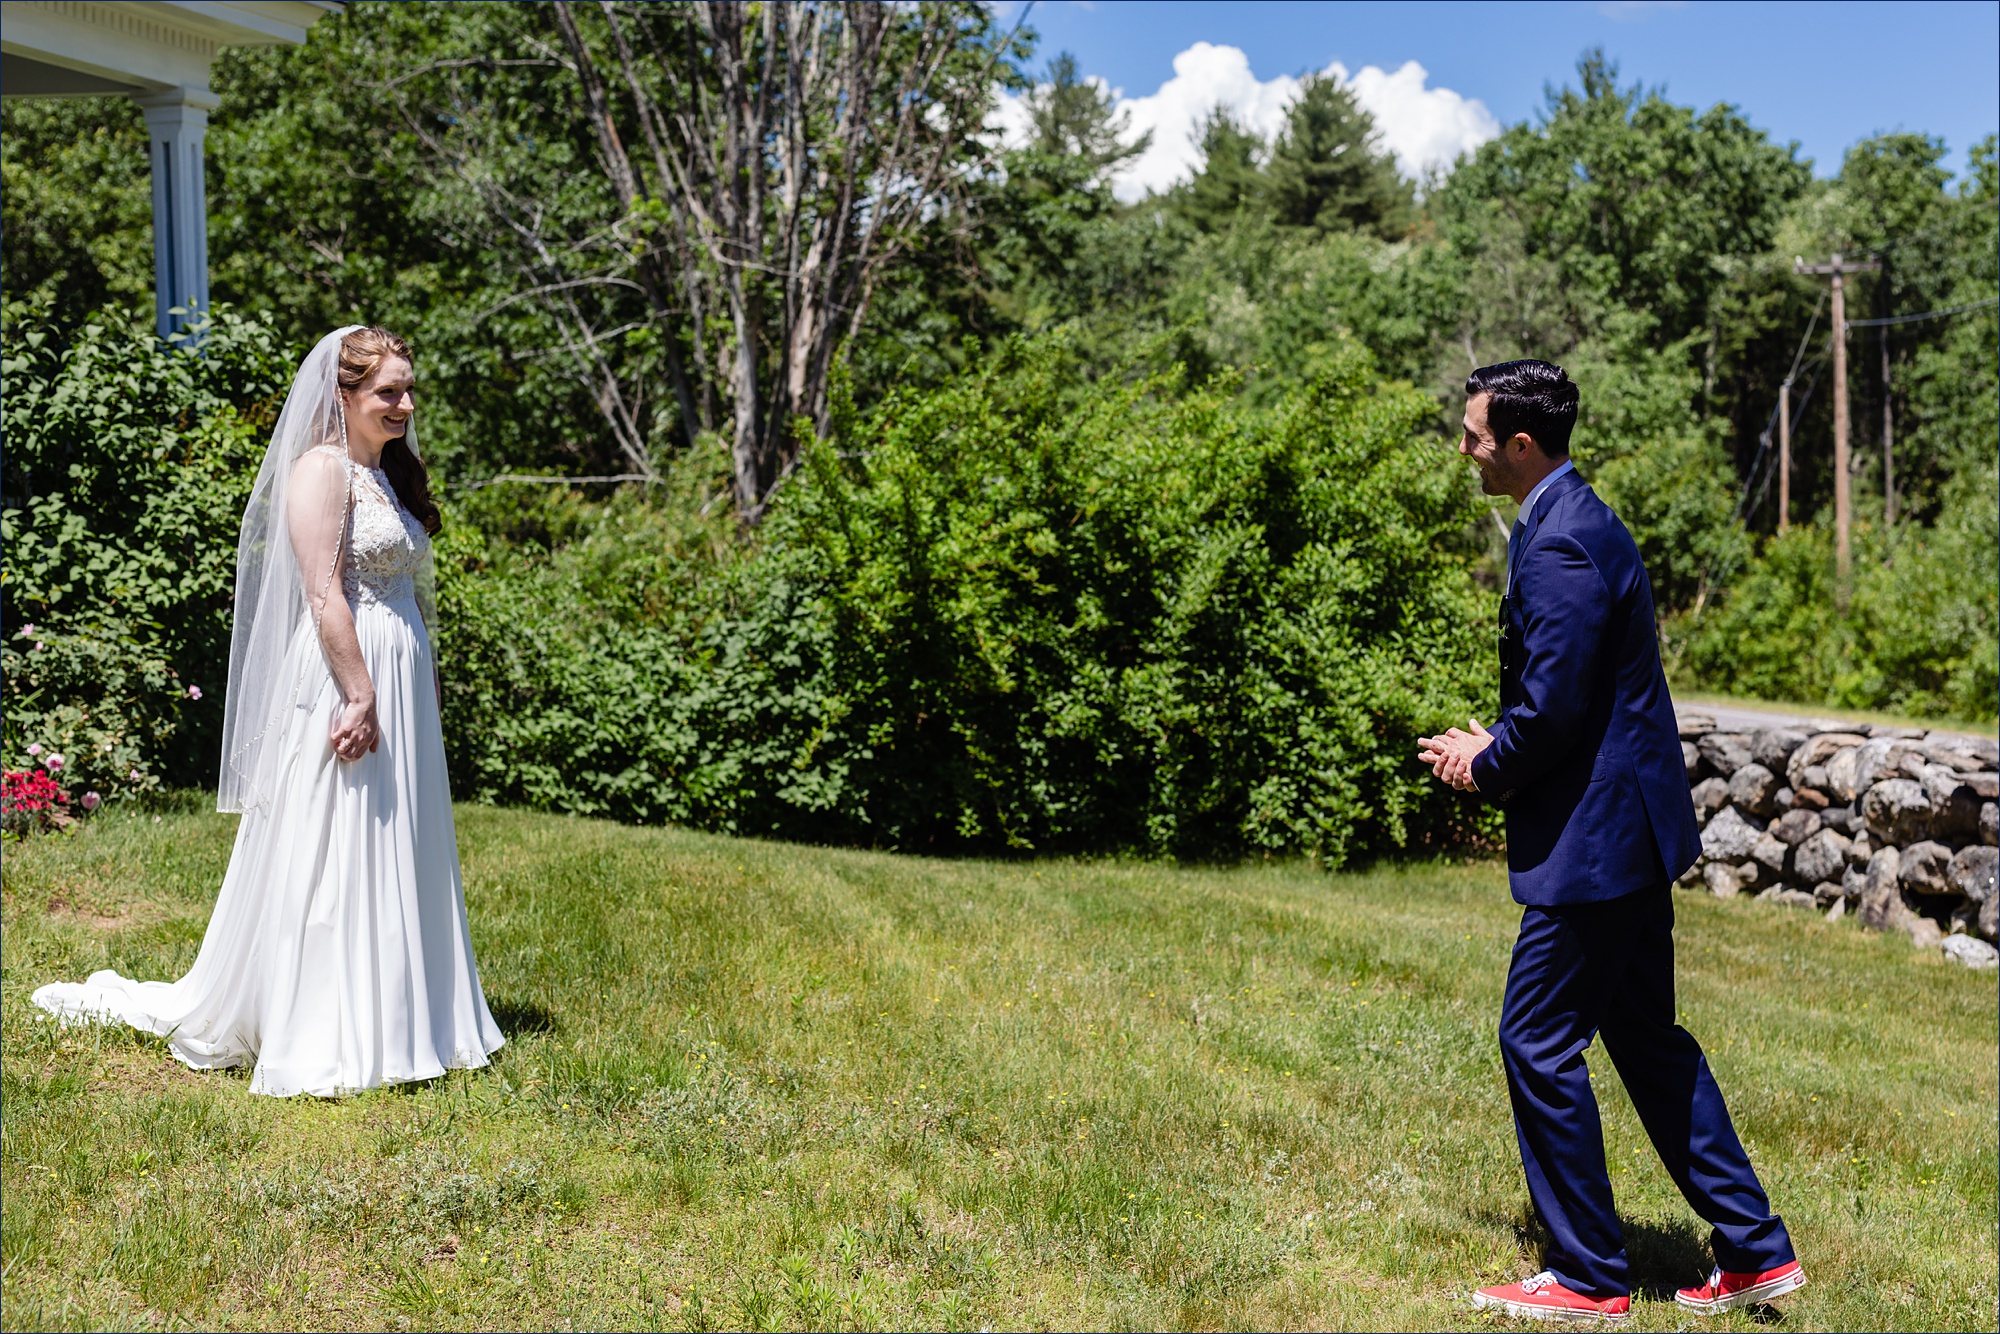 The bride and groom greet each other at their first look on a sunny summer day